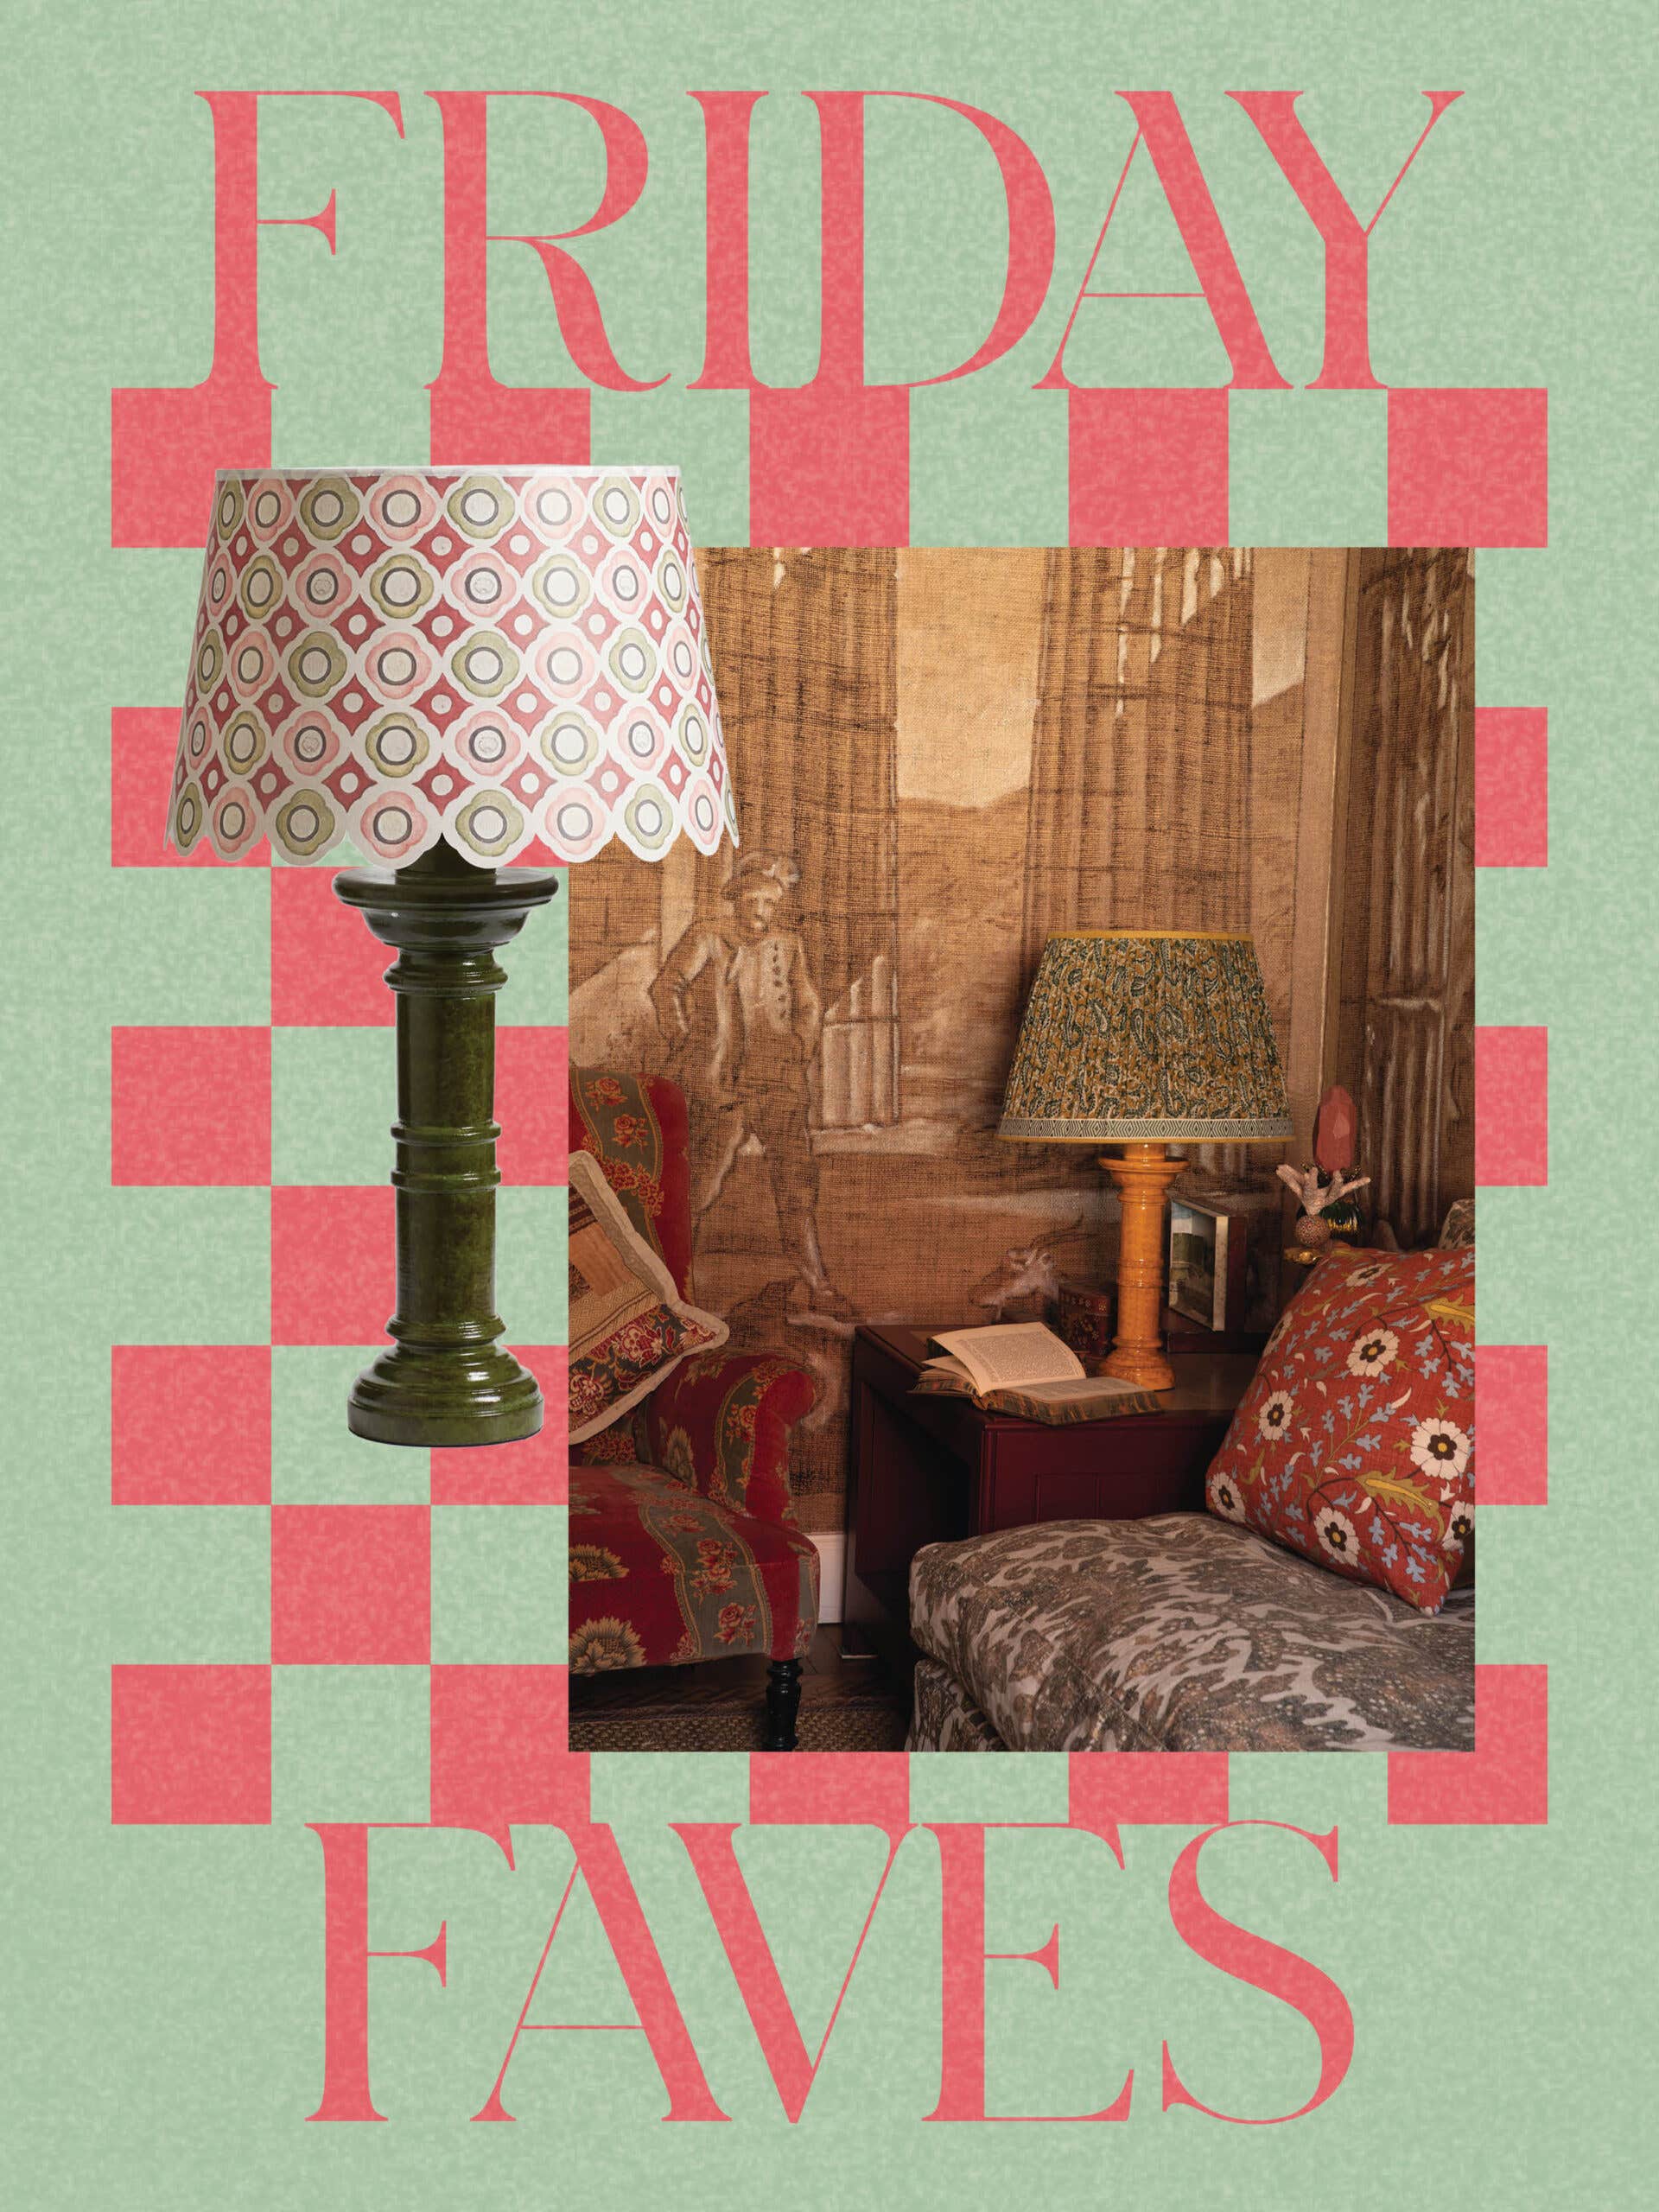 A Piece of Vintage Fabric From an Indian Market Inspired These Charming Lamps